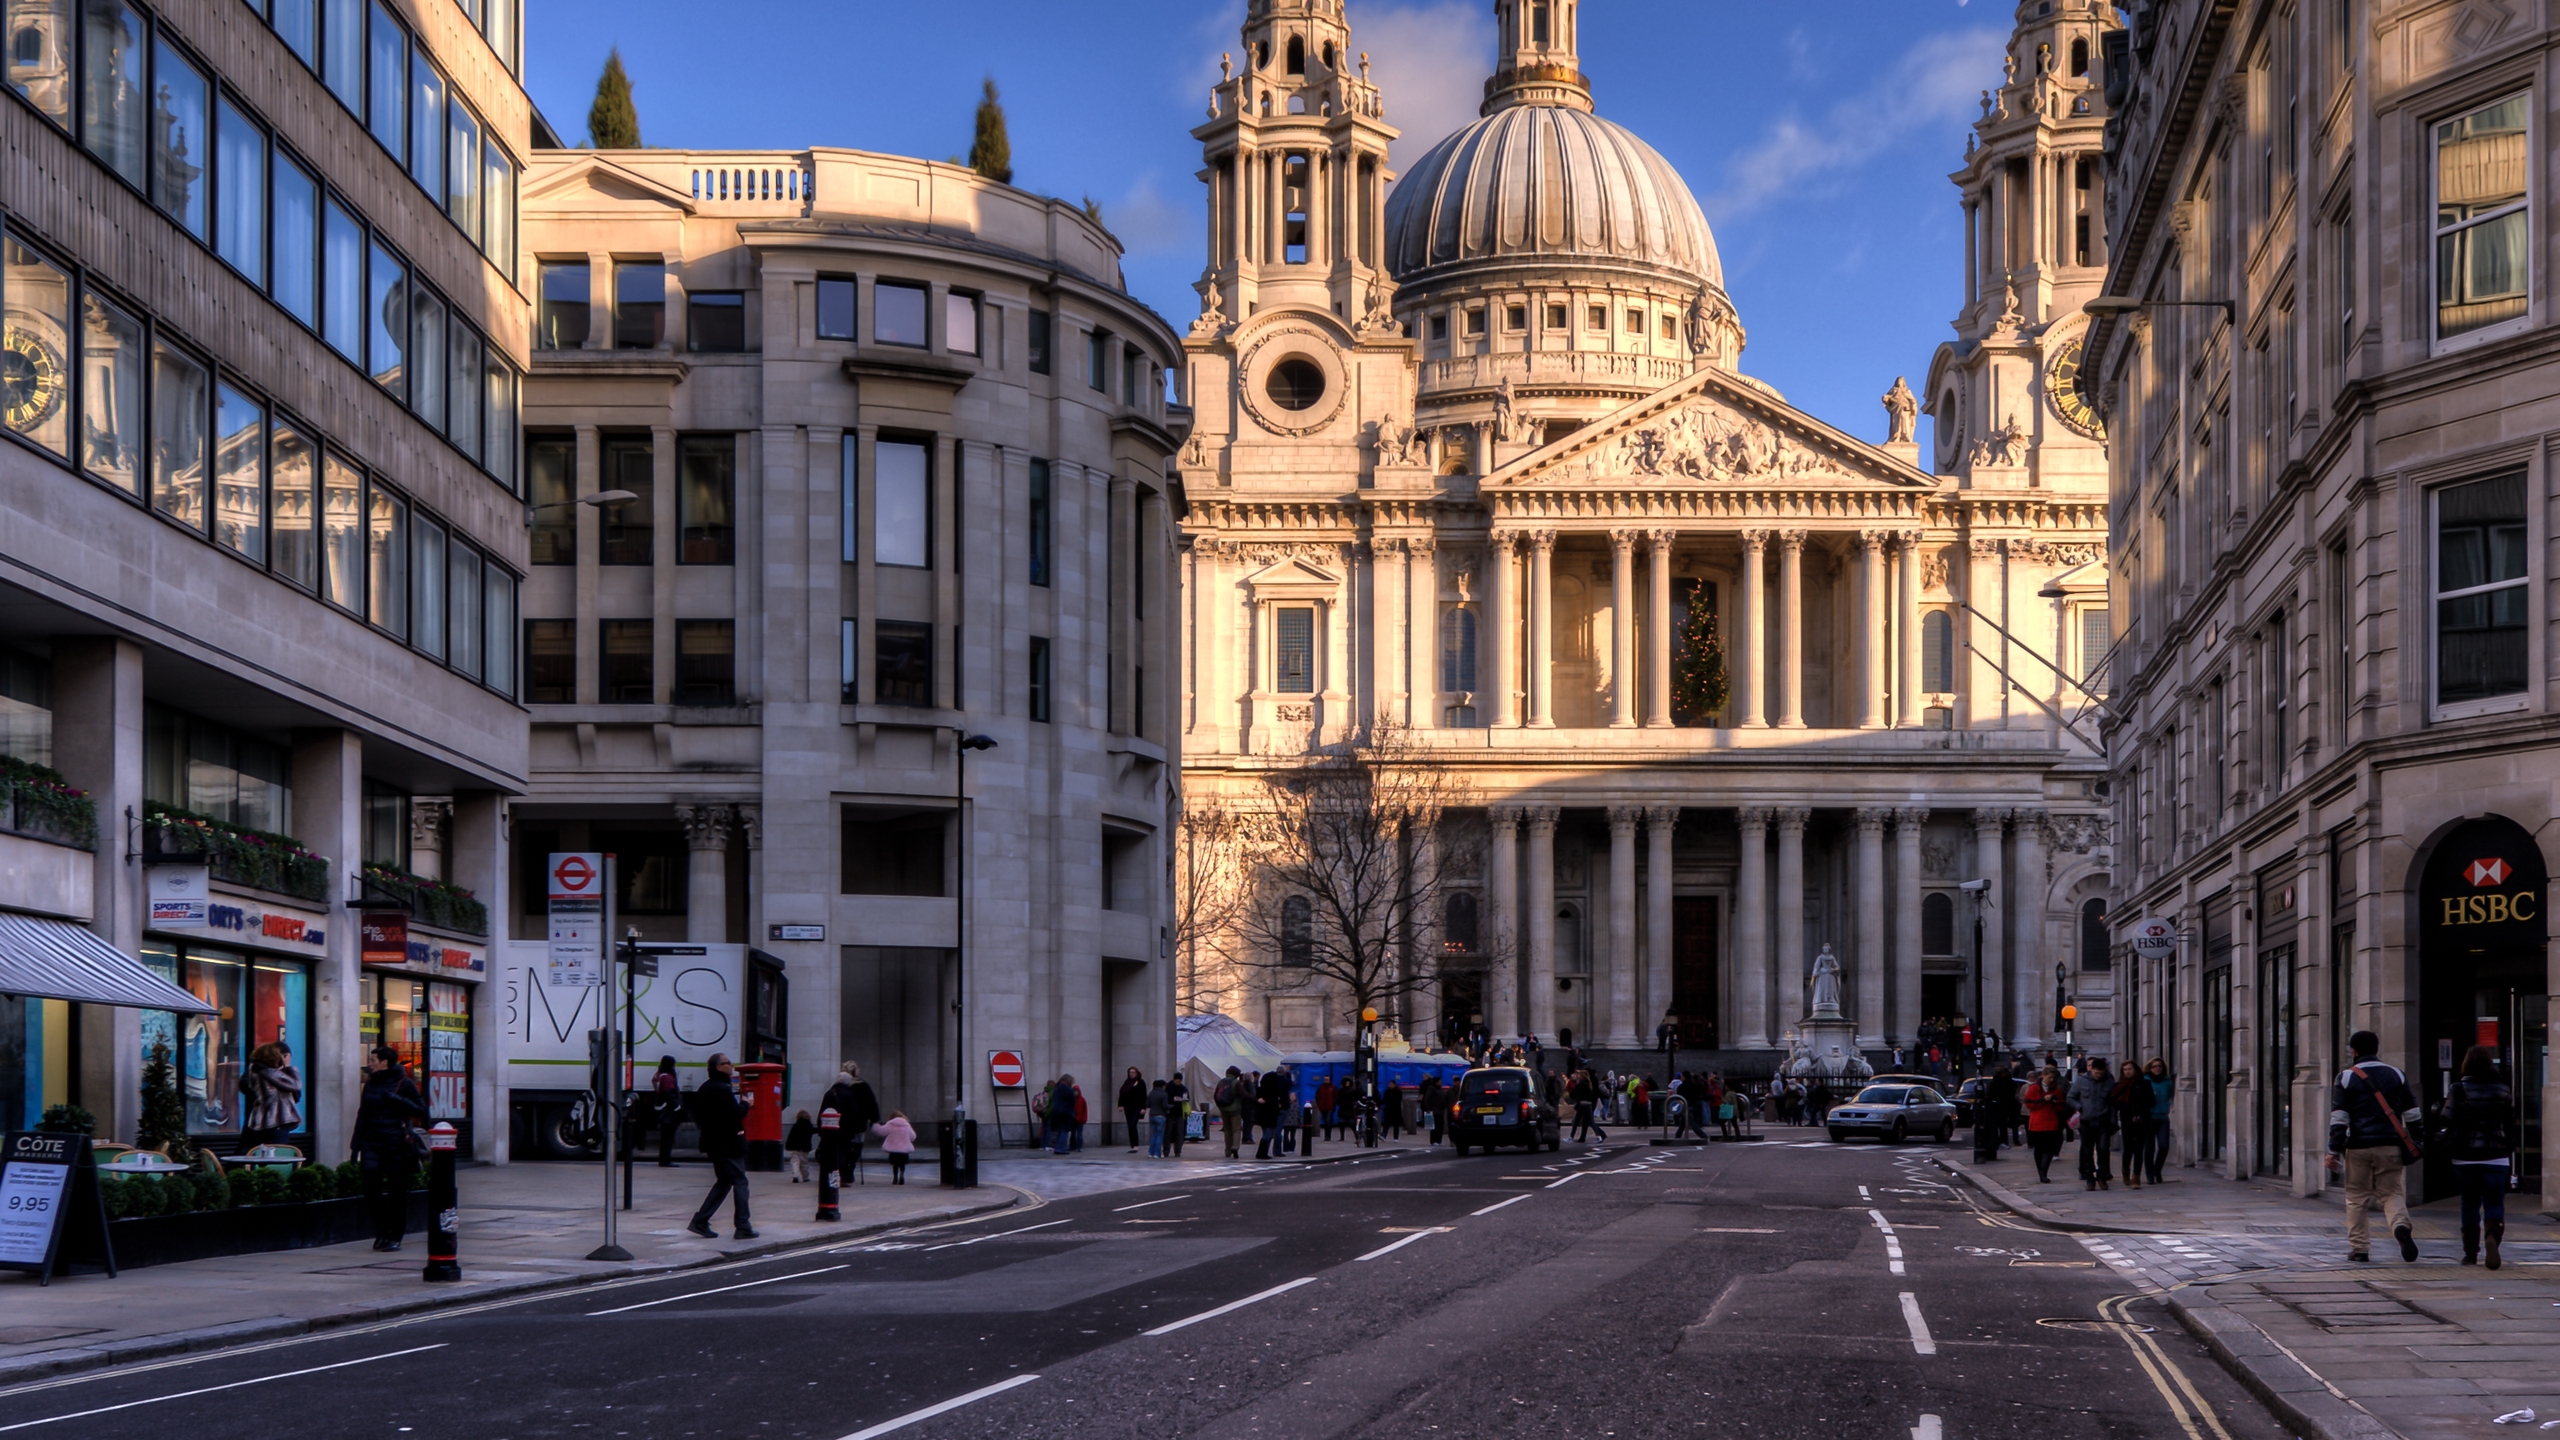 St Pauls Cathedral London for 2560x1440 HDTV resolution